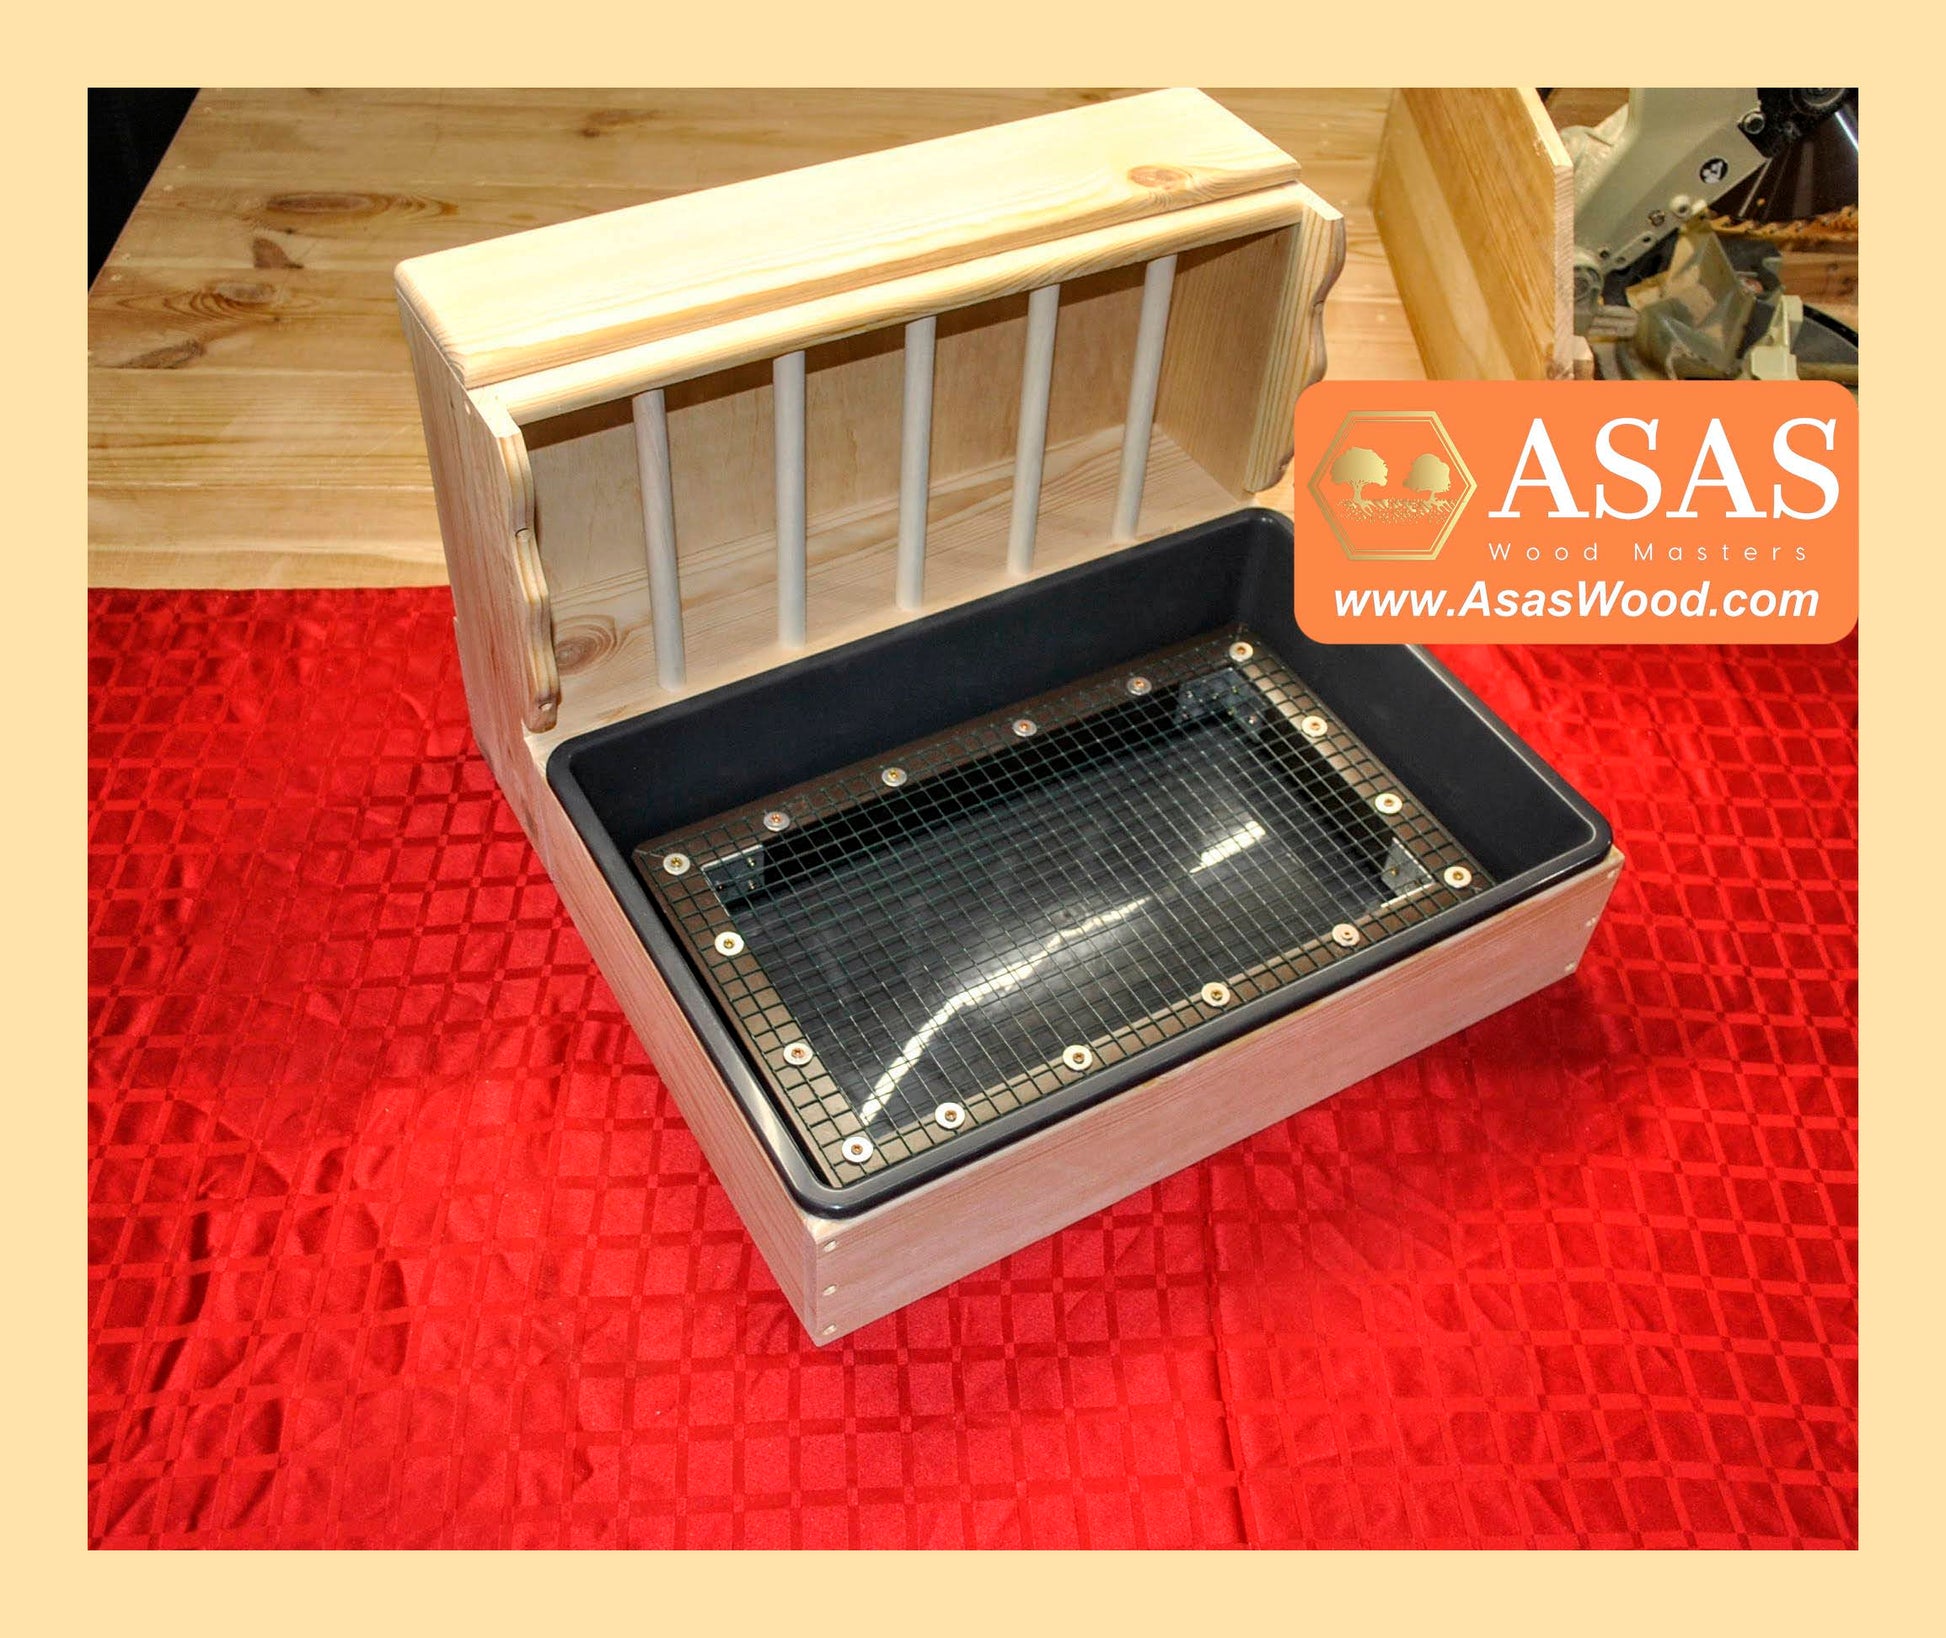 Rabbit hay feeder and wire mesh insert, made by asaswood